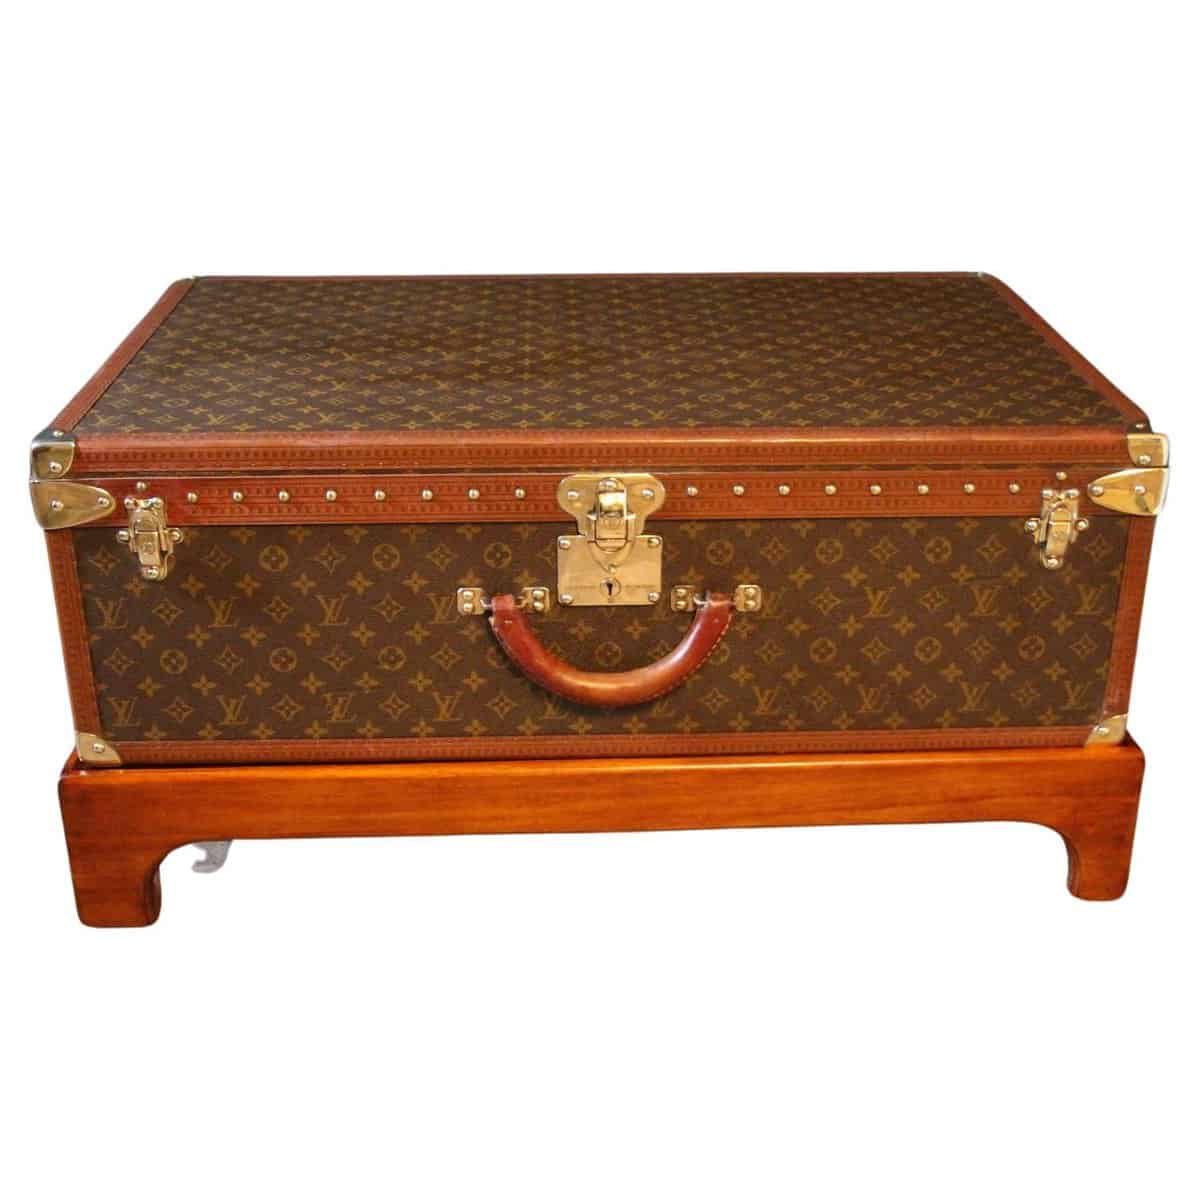 Louis Vuitton Hardside luggage. Alzer 60.70.80 KOS home  Louis vuitton  handbags, Louis vuitton trunk, Louis vuitton accessories